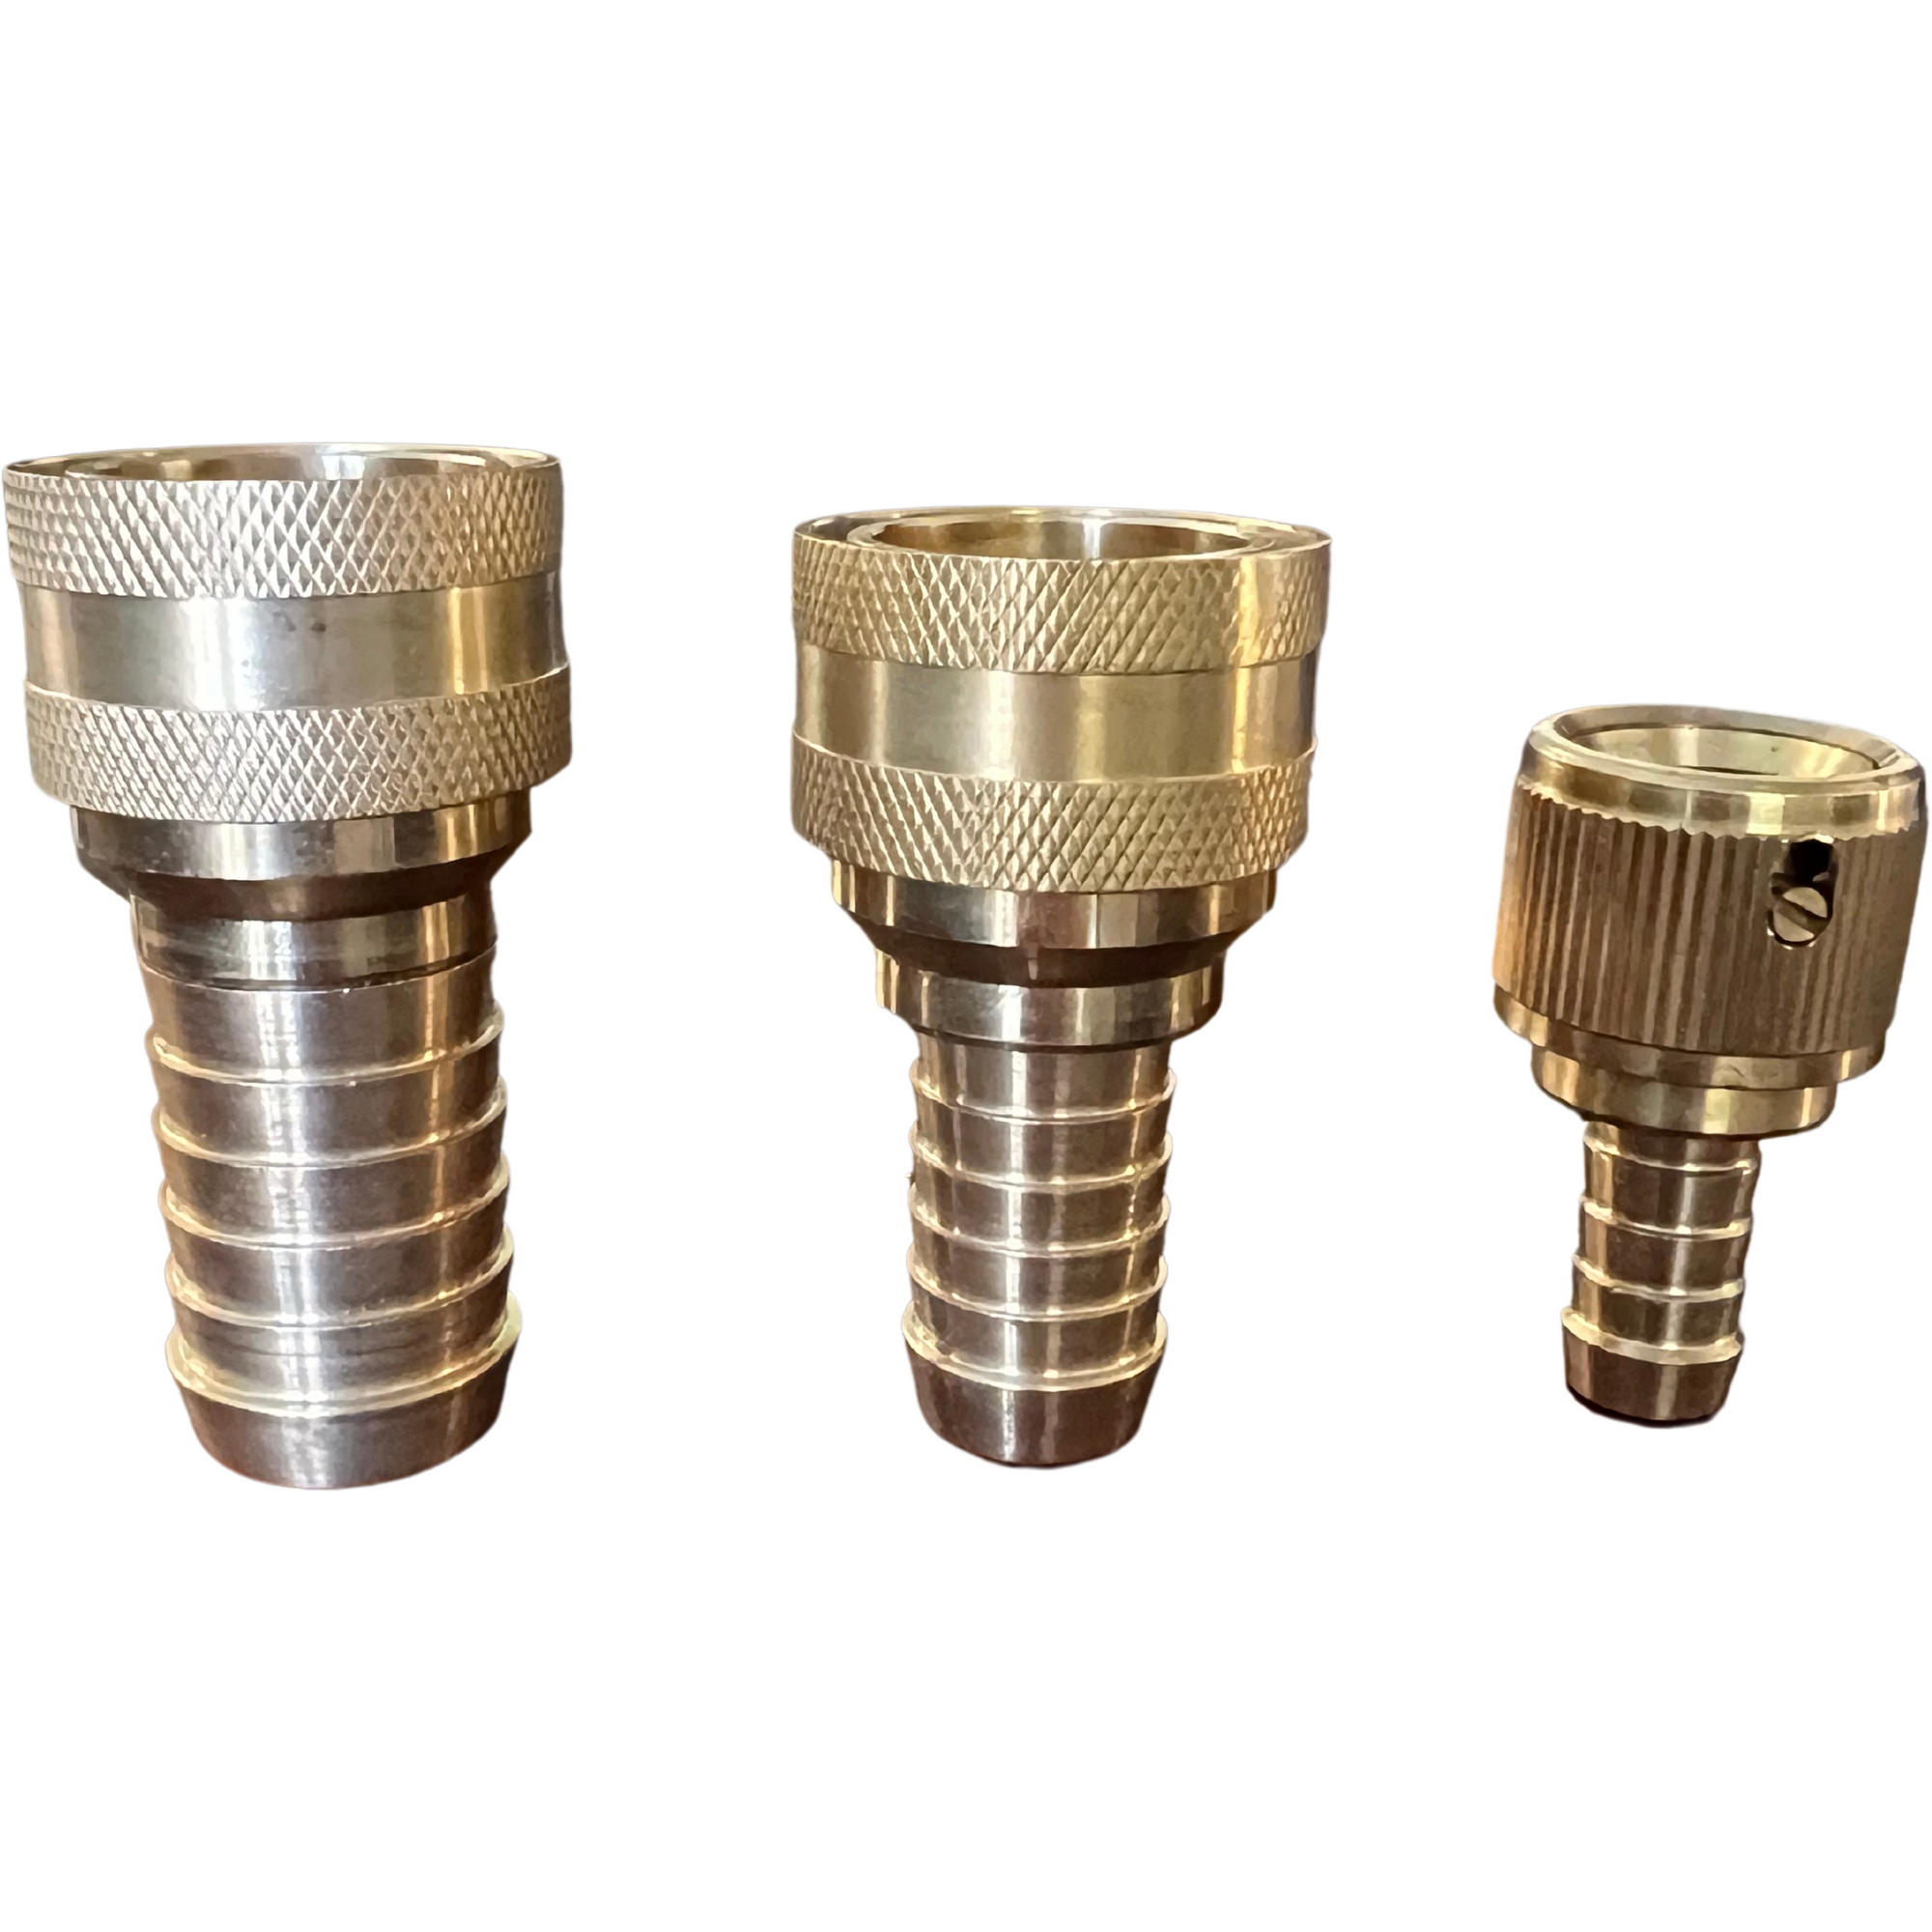 ZORRO Brass Hose Barb Snap on Connector available in various sizes